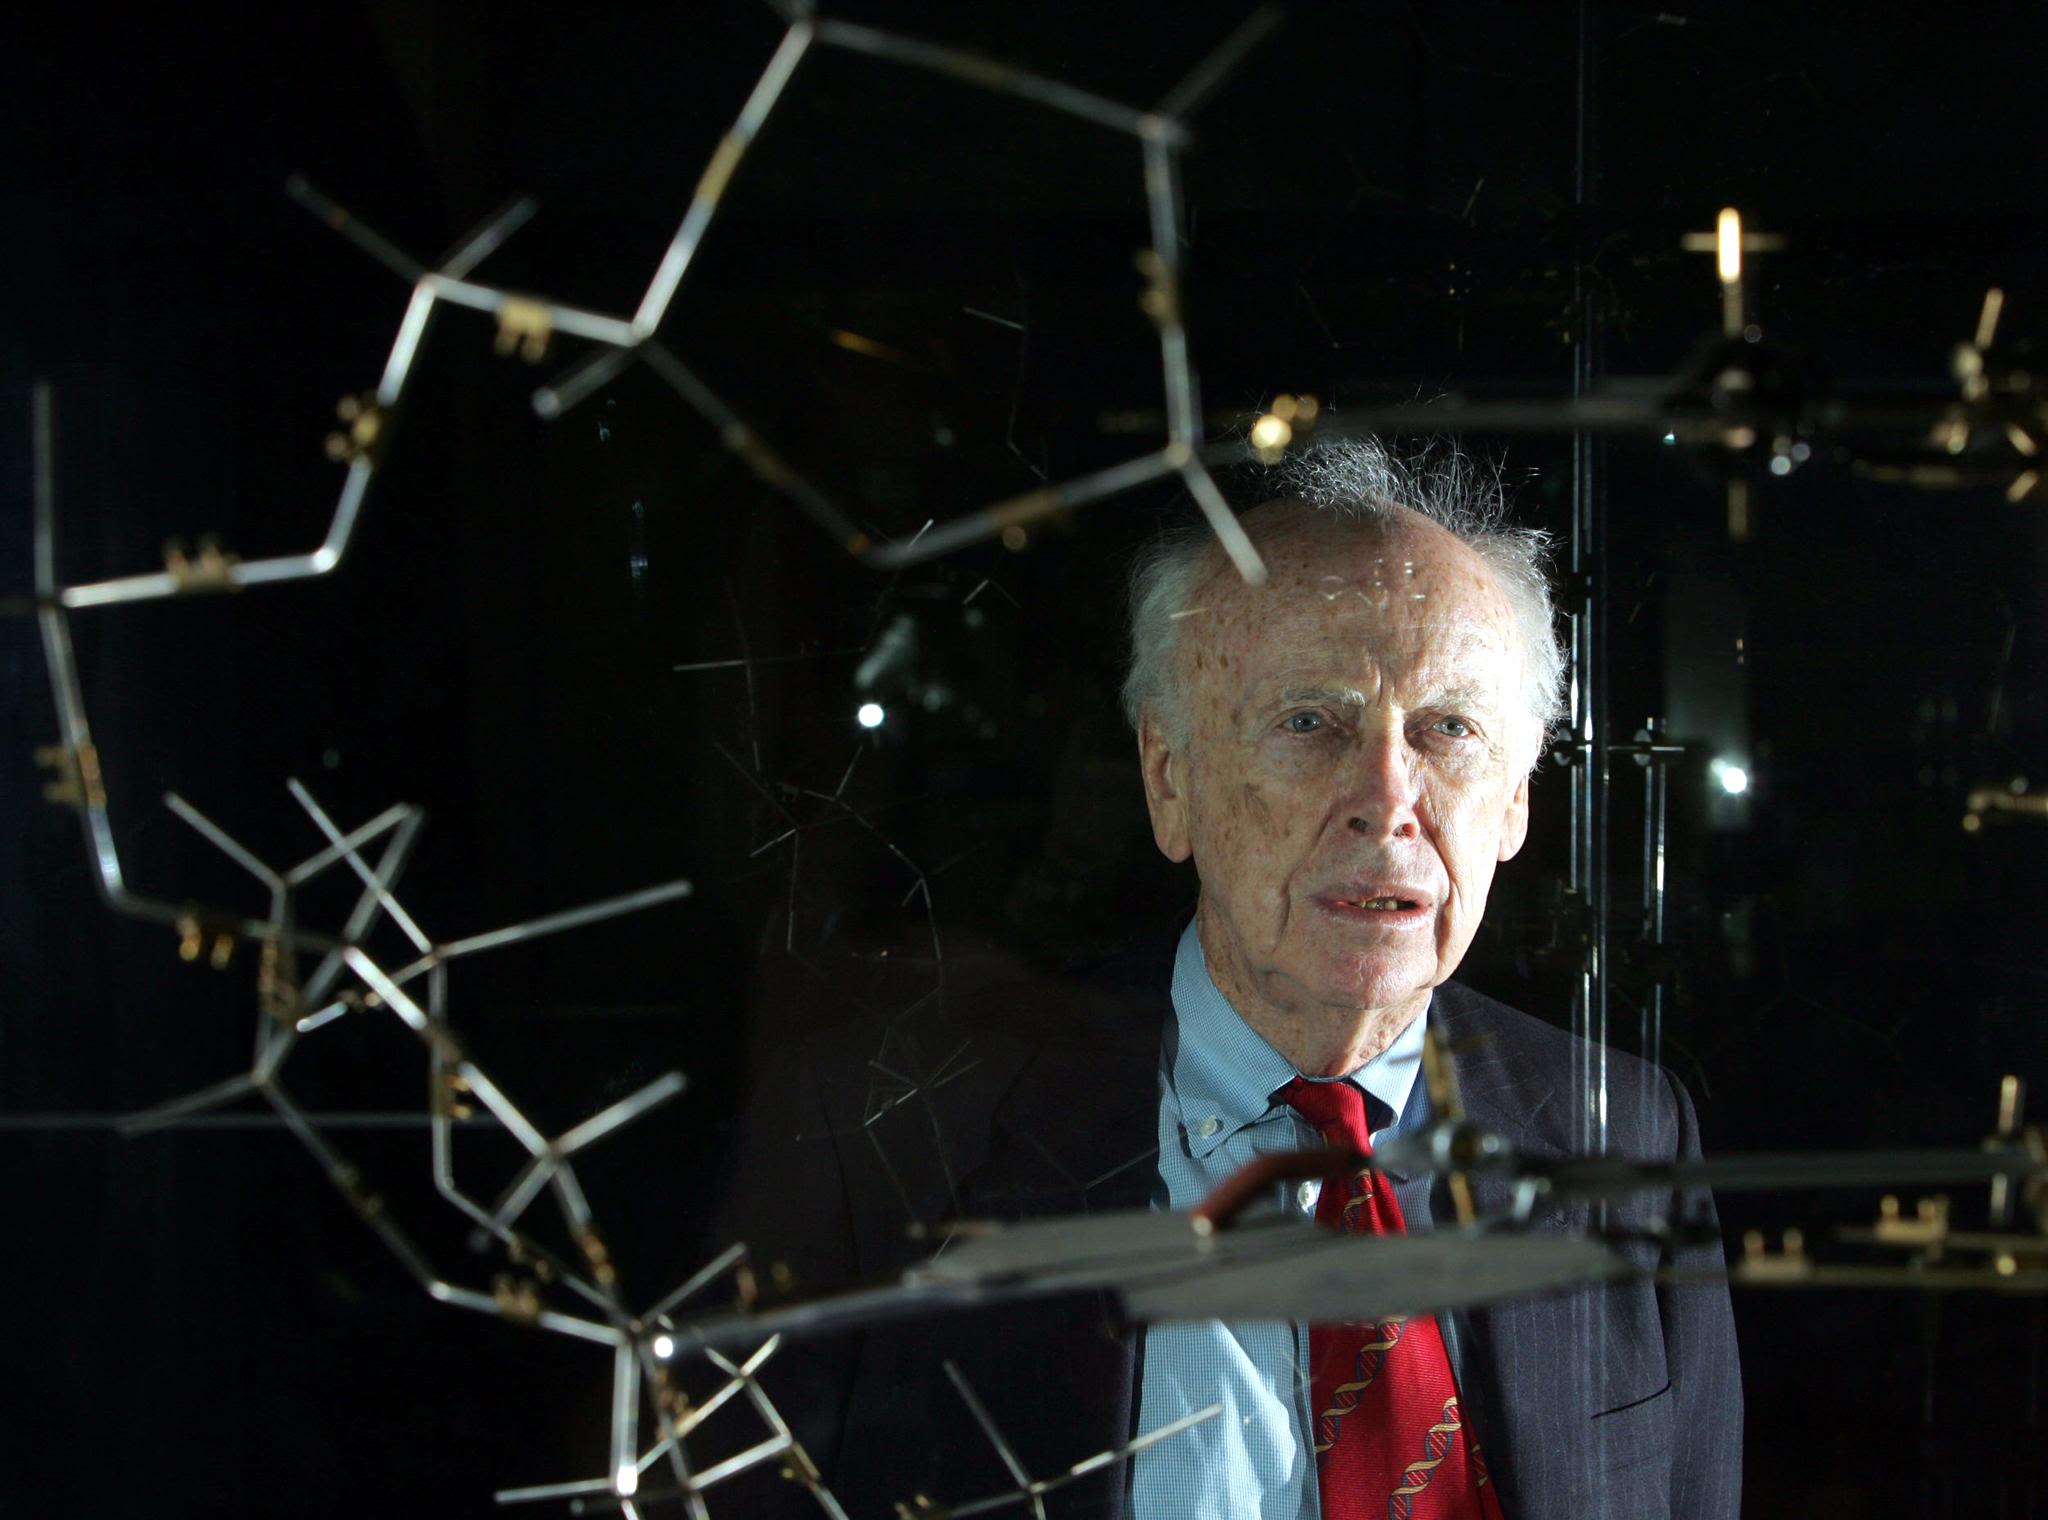 James Watson to sell Nobel Prize medal